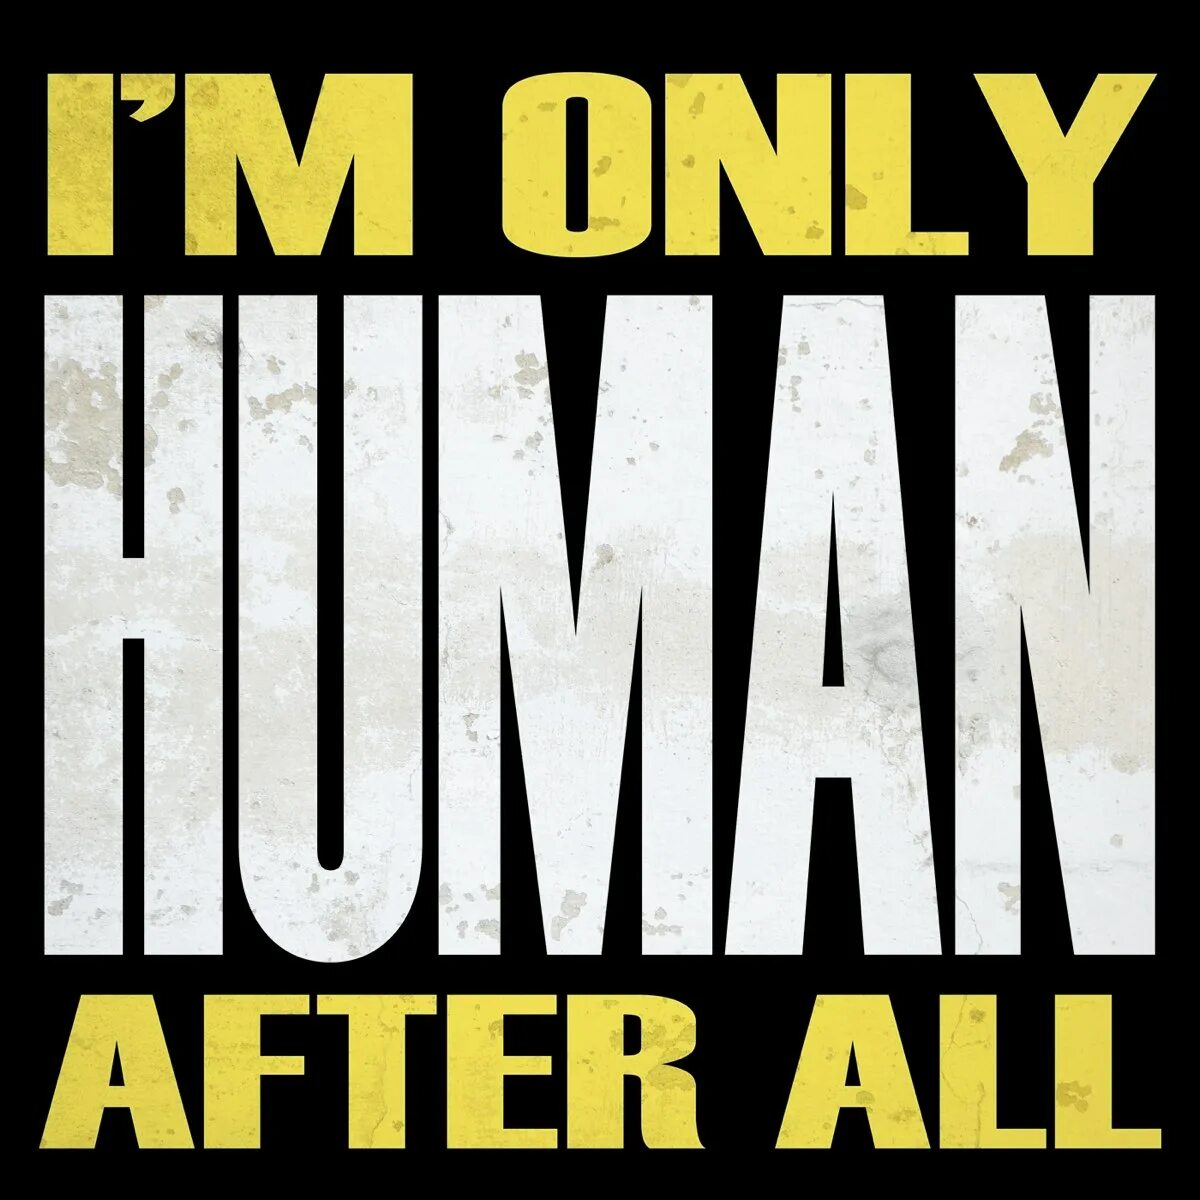 Human after all. Im only Human after all. I am a Human after all. I M only Human. Only human after all